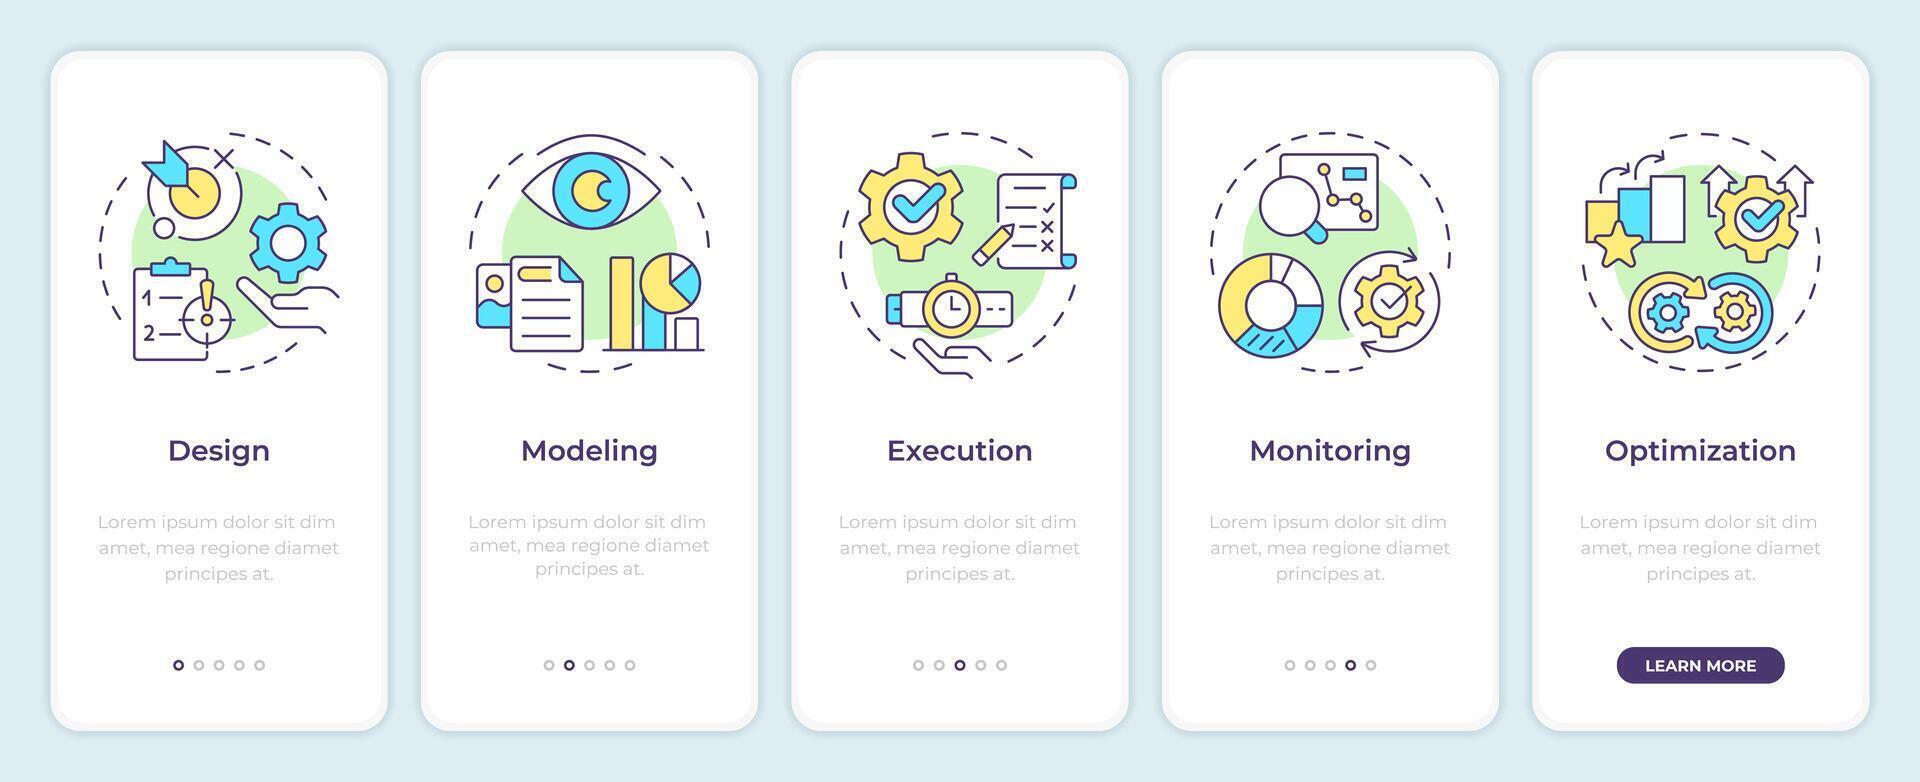 BPM lifecycle onboarding mobile app screen. Business modeling. Walkthrough 5 steps editable graphic instructions with linear concepts. UI, UX, GUI template. Montserrat SemiBold, Regular fonts used vector